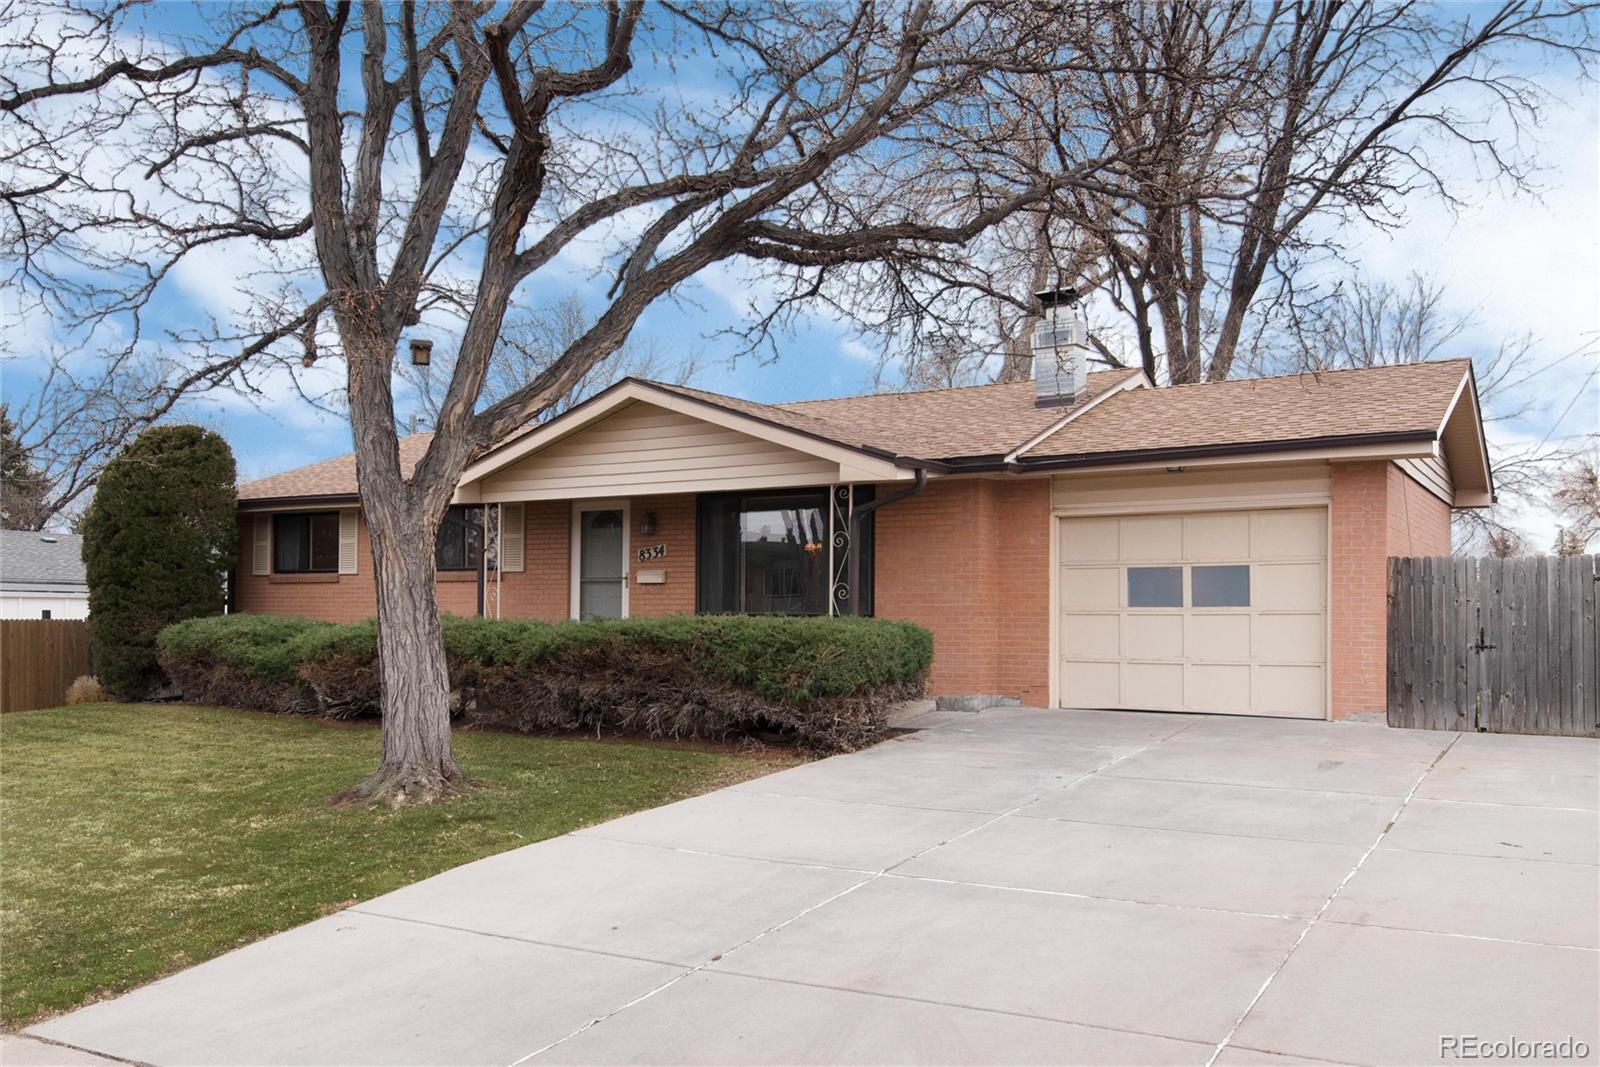 8334 w arizona drive, lakewood sold home. Closed on 2024-04-12 for $545,000.